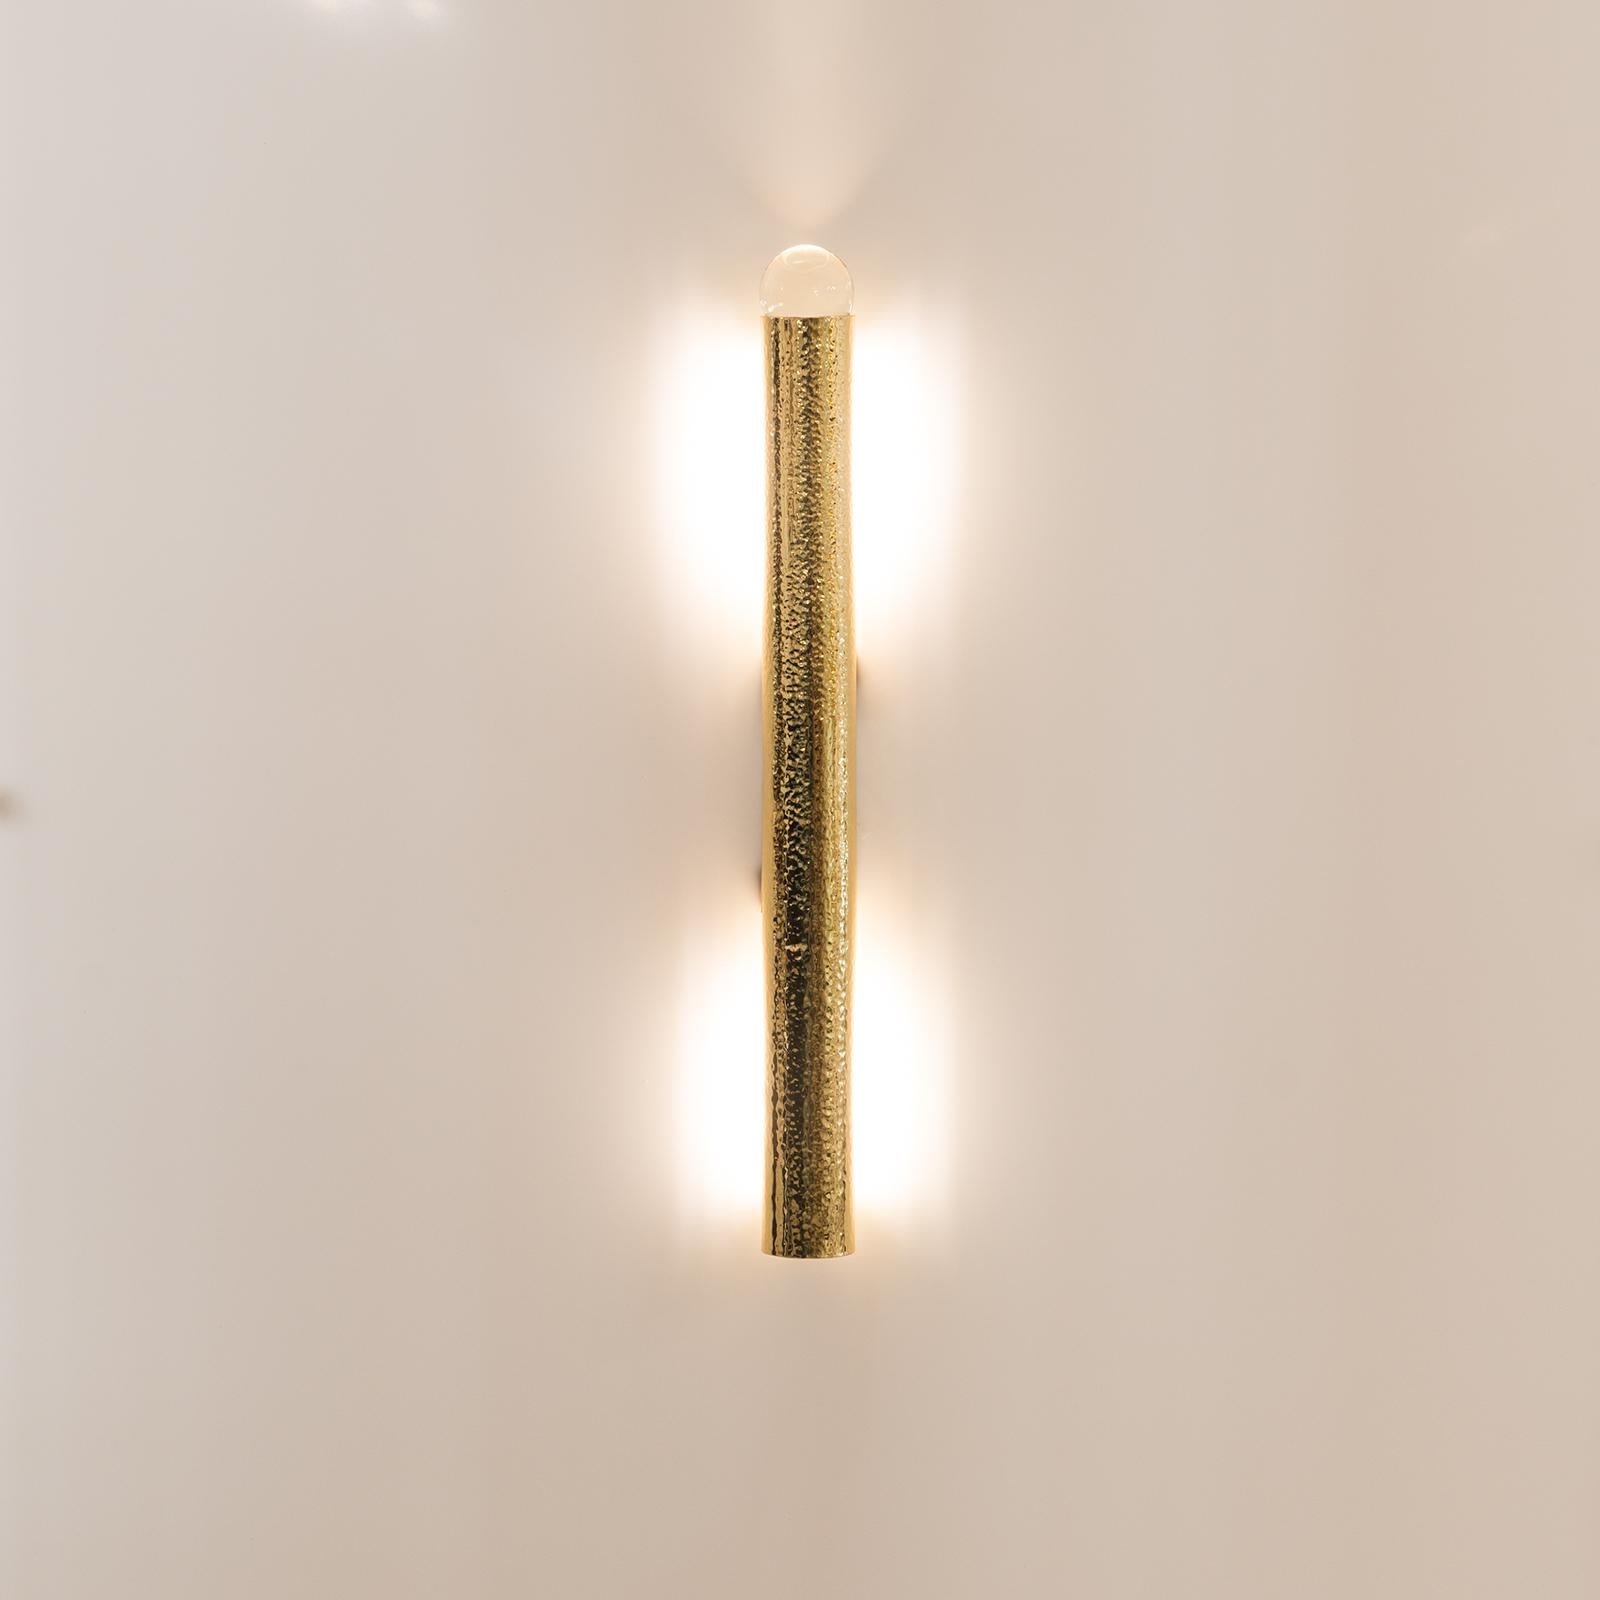 Hand-Crafted Elegant Hammered Brass, Tube Wall Light with a Crystal-Ball For Sale